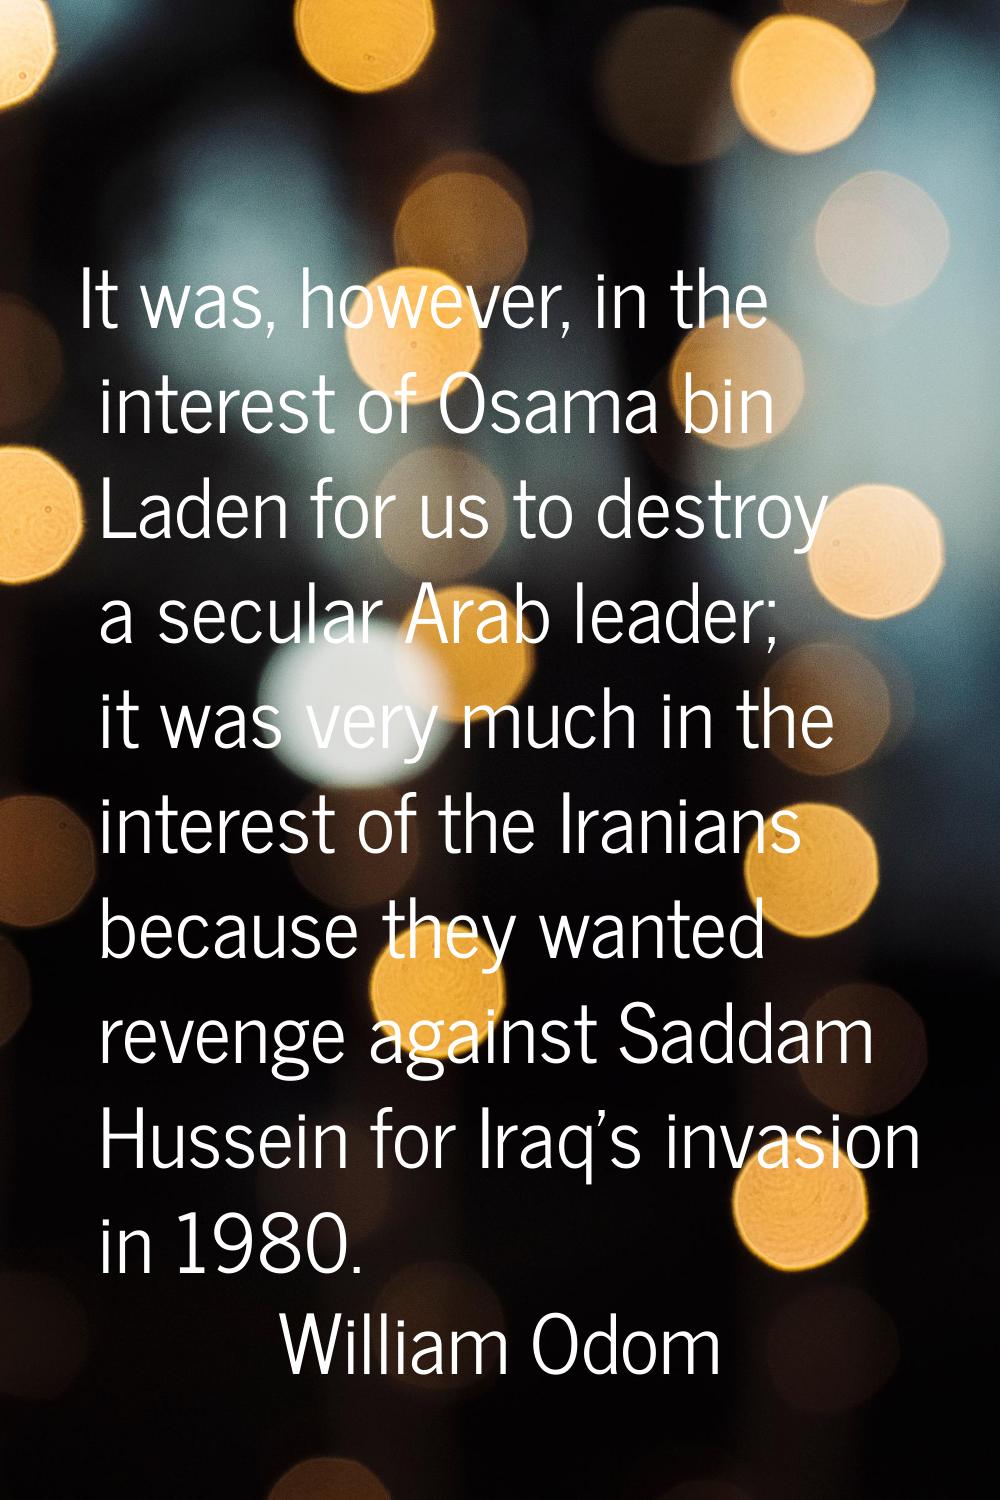 It was, however, in the interest of Osama bin Laden for us to destroy a secular Arab leader; it was